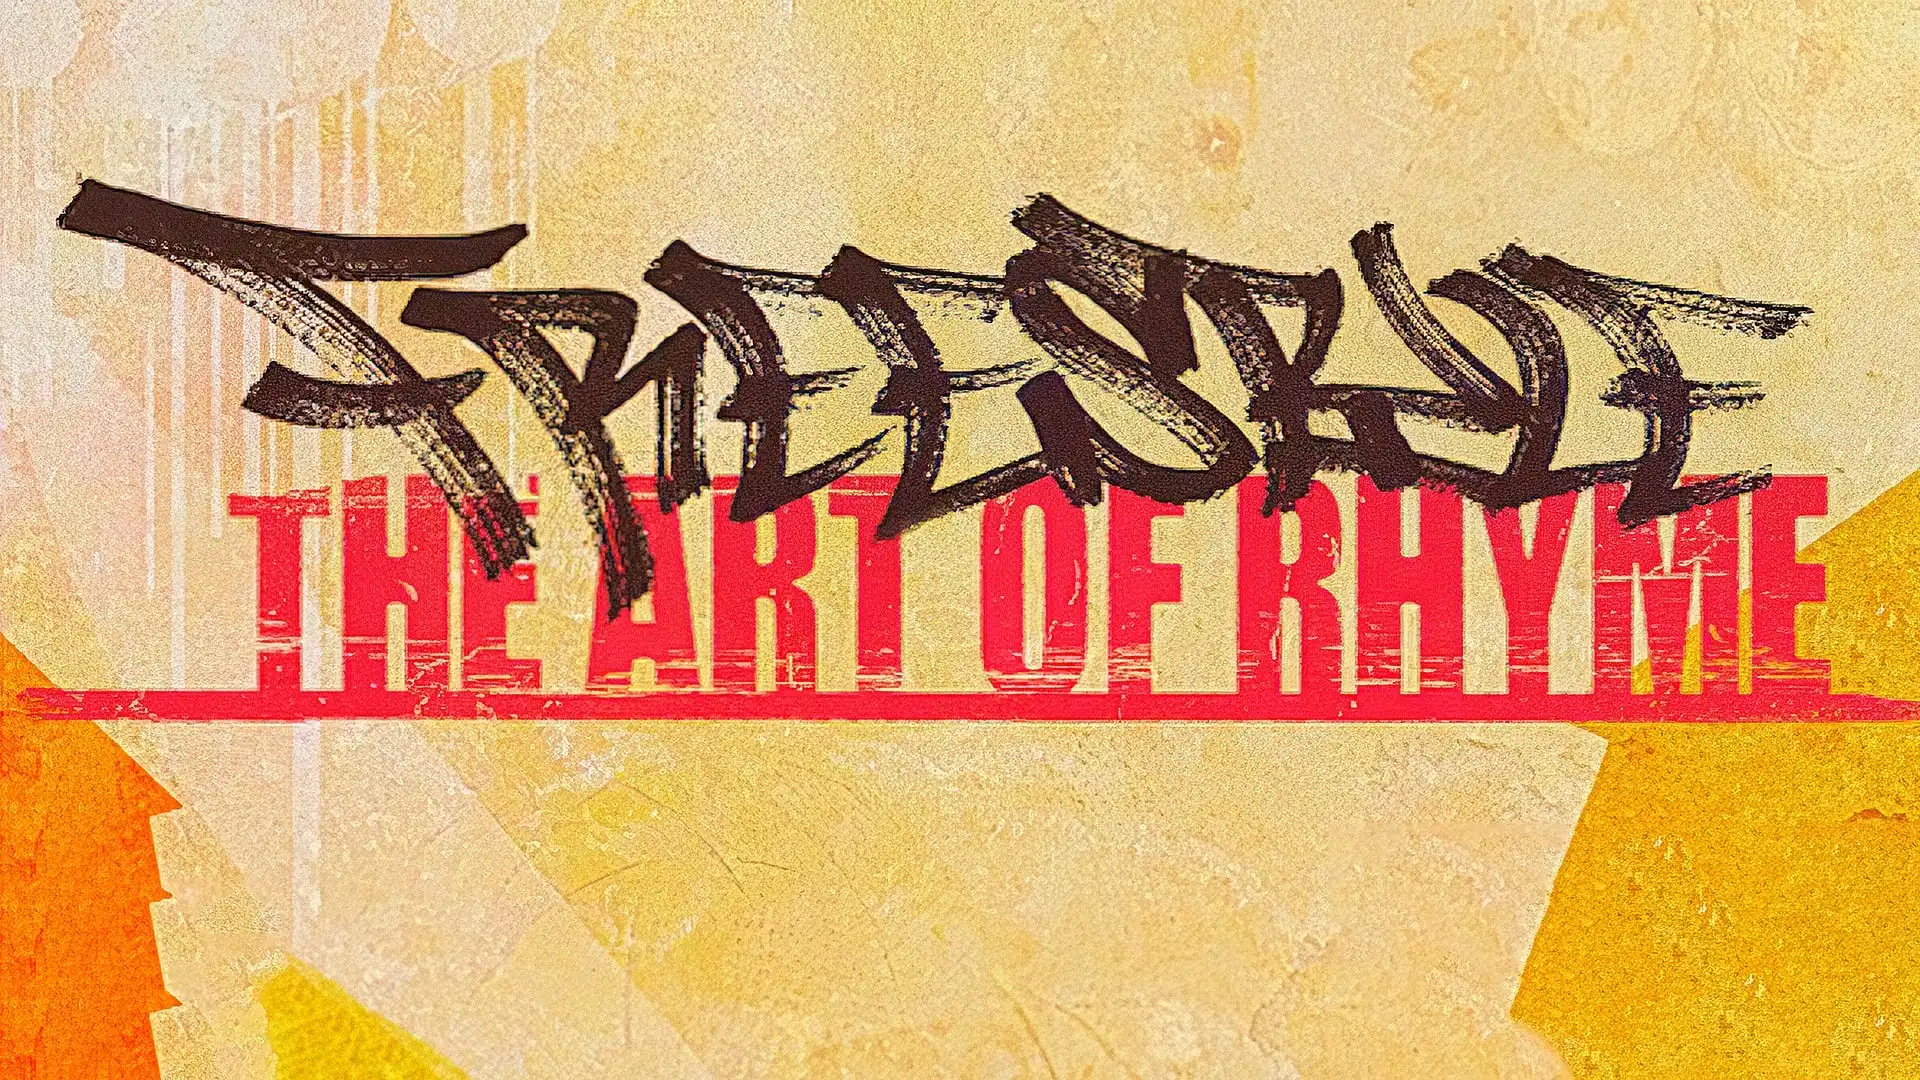 Watch and Download Freestyle: The Art of Rhyme 1